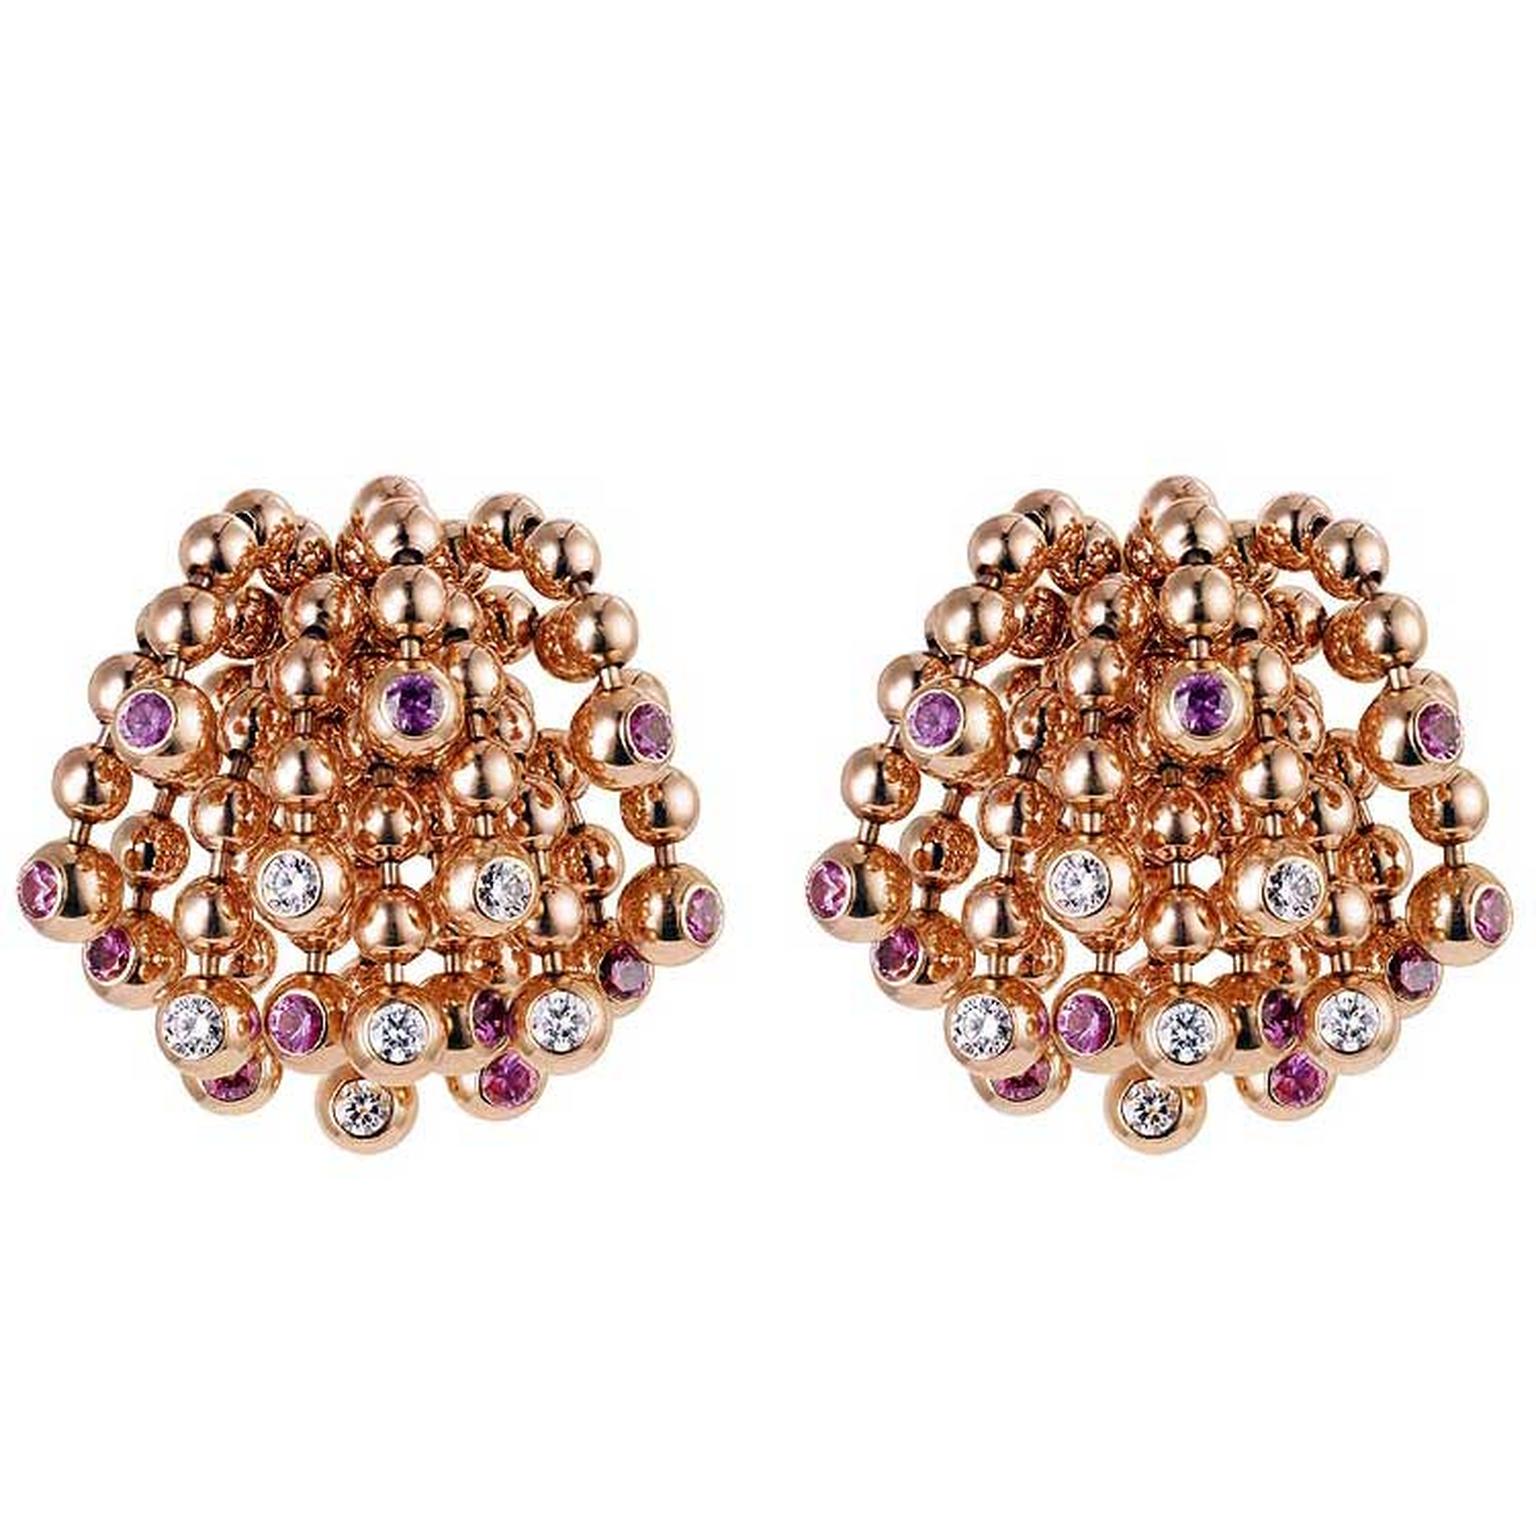 Cartier Paris Nouvelle Vague Sparkling rose gold earrings with diamonds and pink sapphires